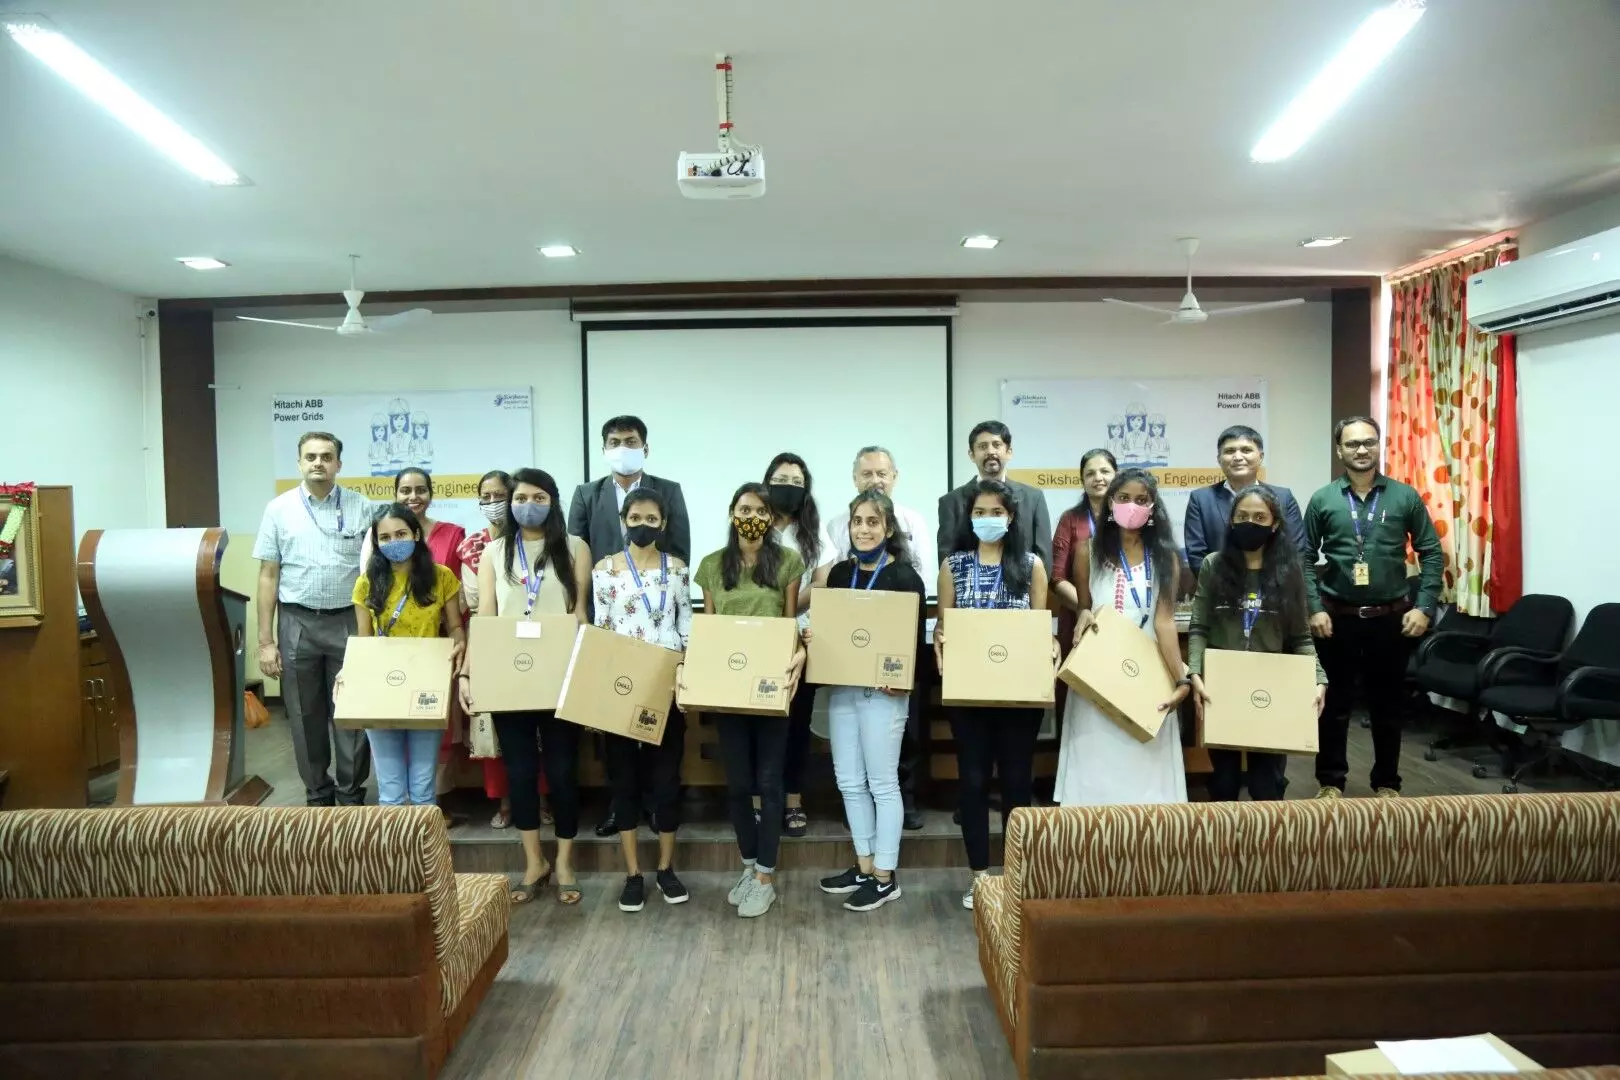 Parul Universitys girl student engineers receive scholarships and laptops under the Women in Engineering program